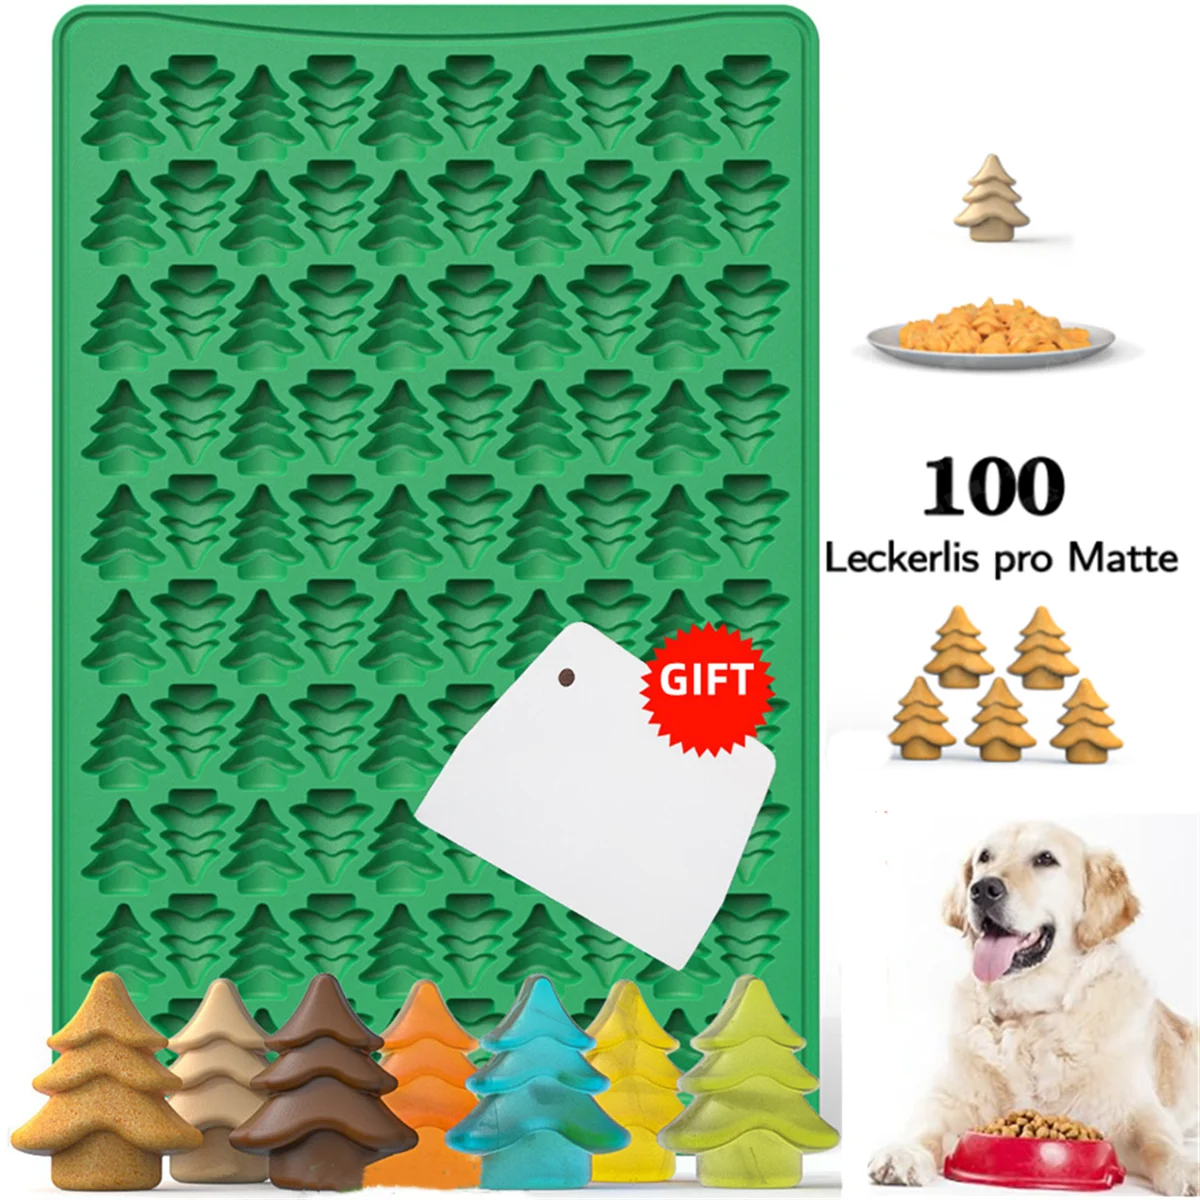 

100 Christmas Tree Shape Silicone Molds Food Grade Mini Gummy Mold for Baking Cookies Pudding Jelly Dog Biscuit